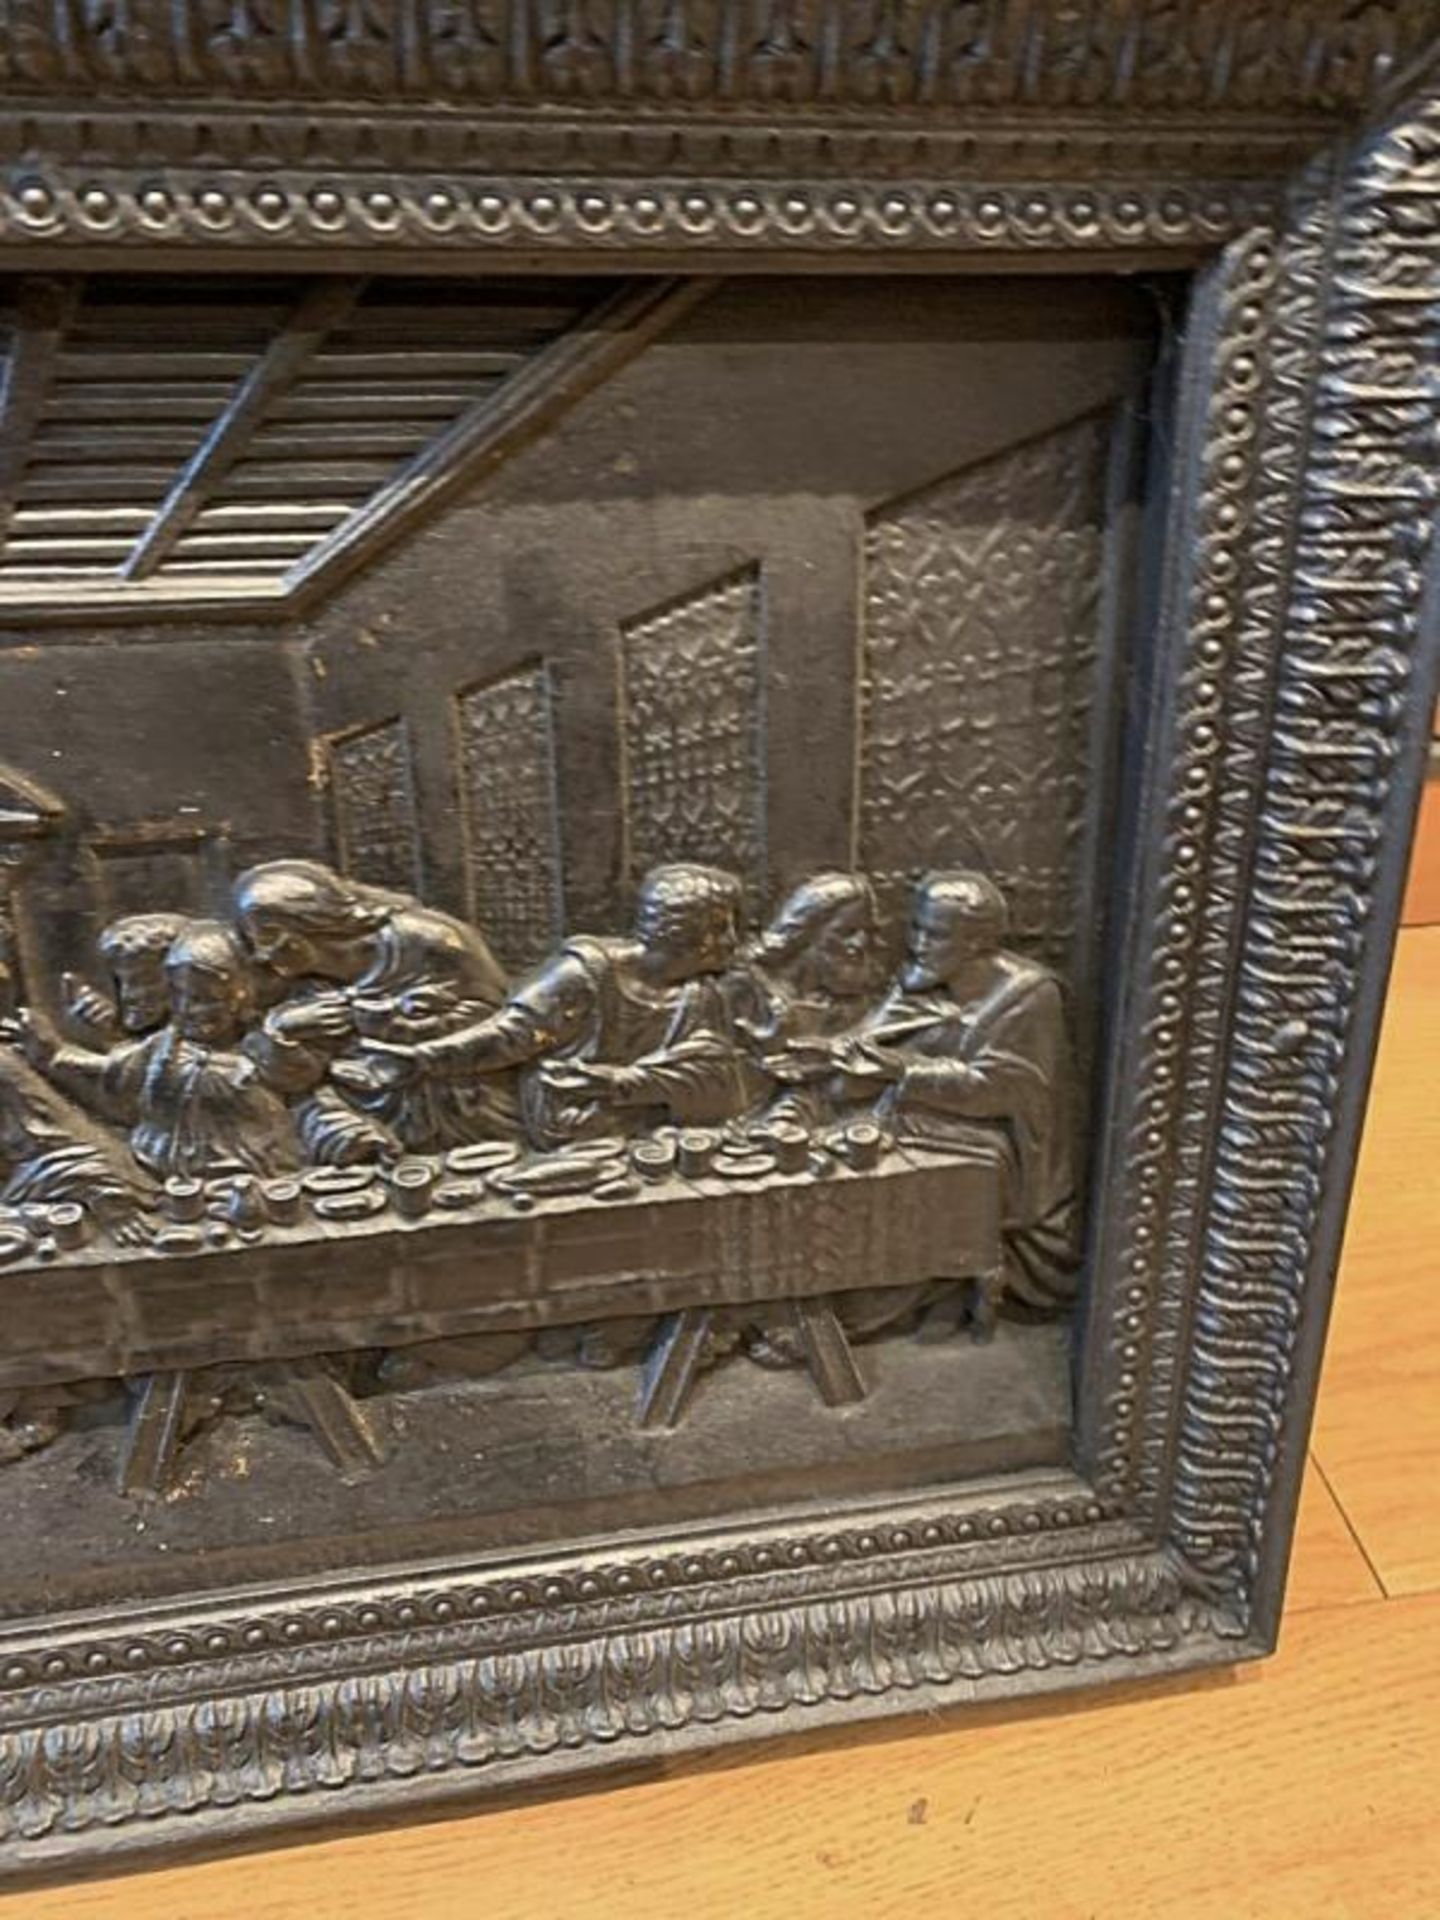 1 x Heavy Solid Cast Iron Rectangular Sculpture Featuring The Famous 'Last Supper' Scene - - Image 6 of 14